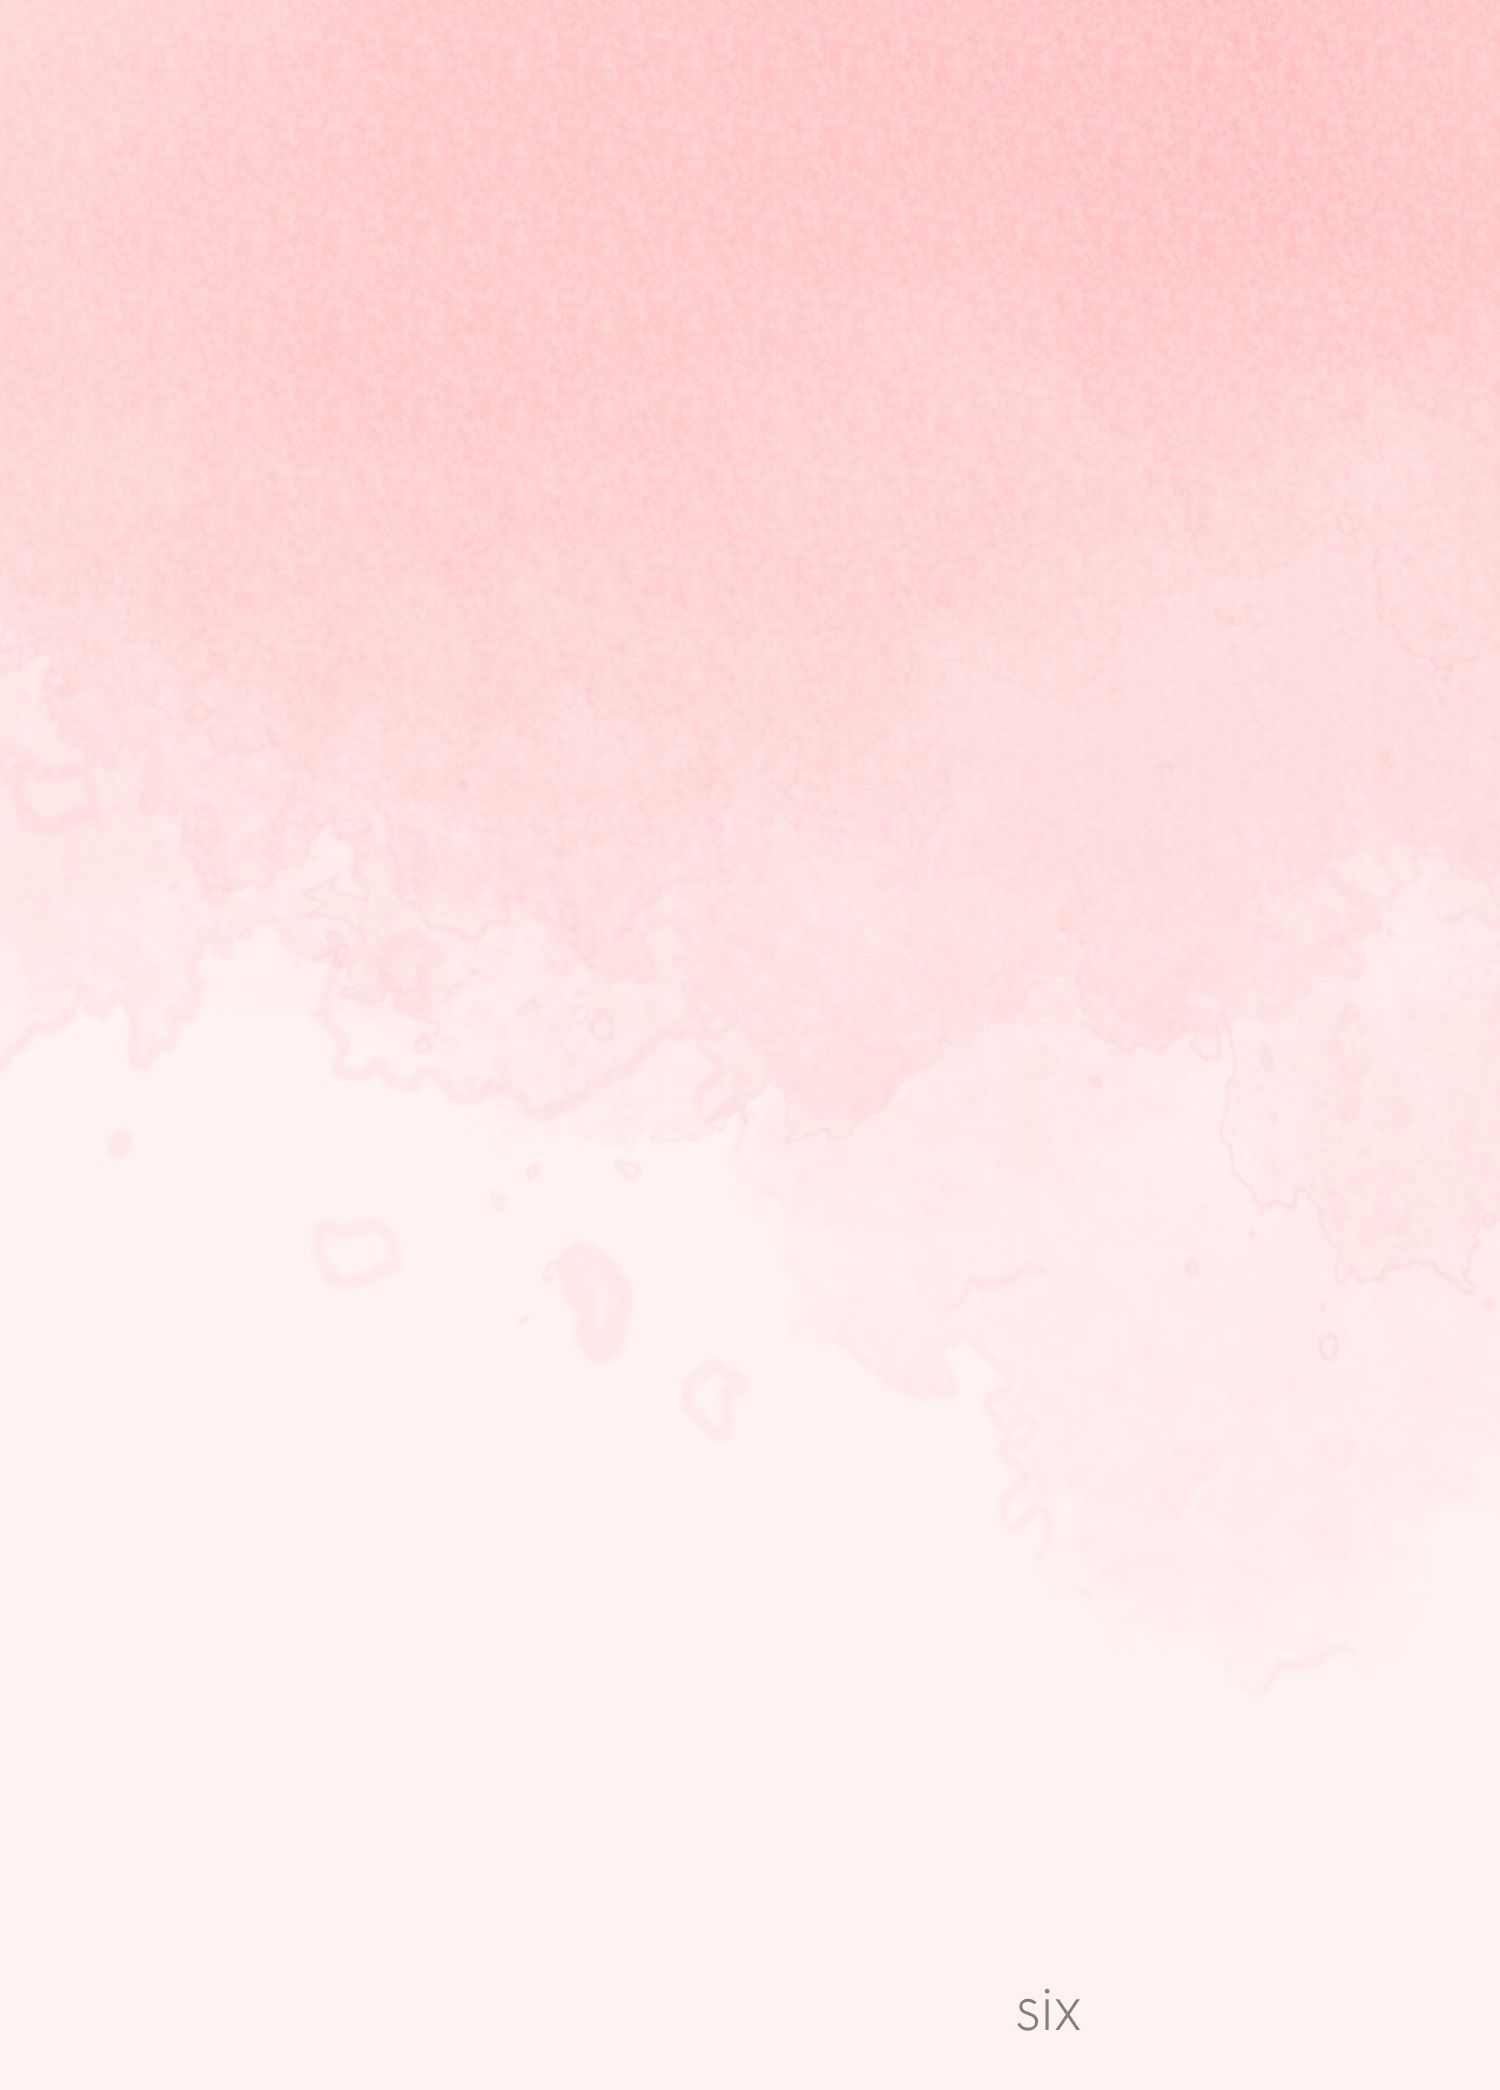 Always Need Pink Watercolour Backgrounds - Pink Peach Watercolor Background  - 1500x2090 Wallpaper 